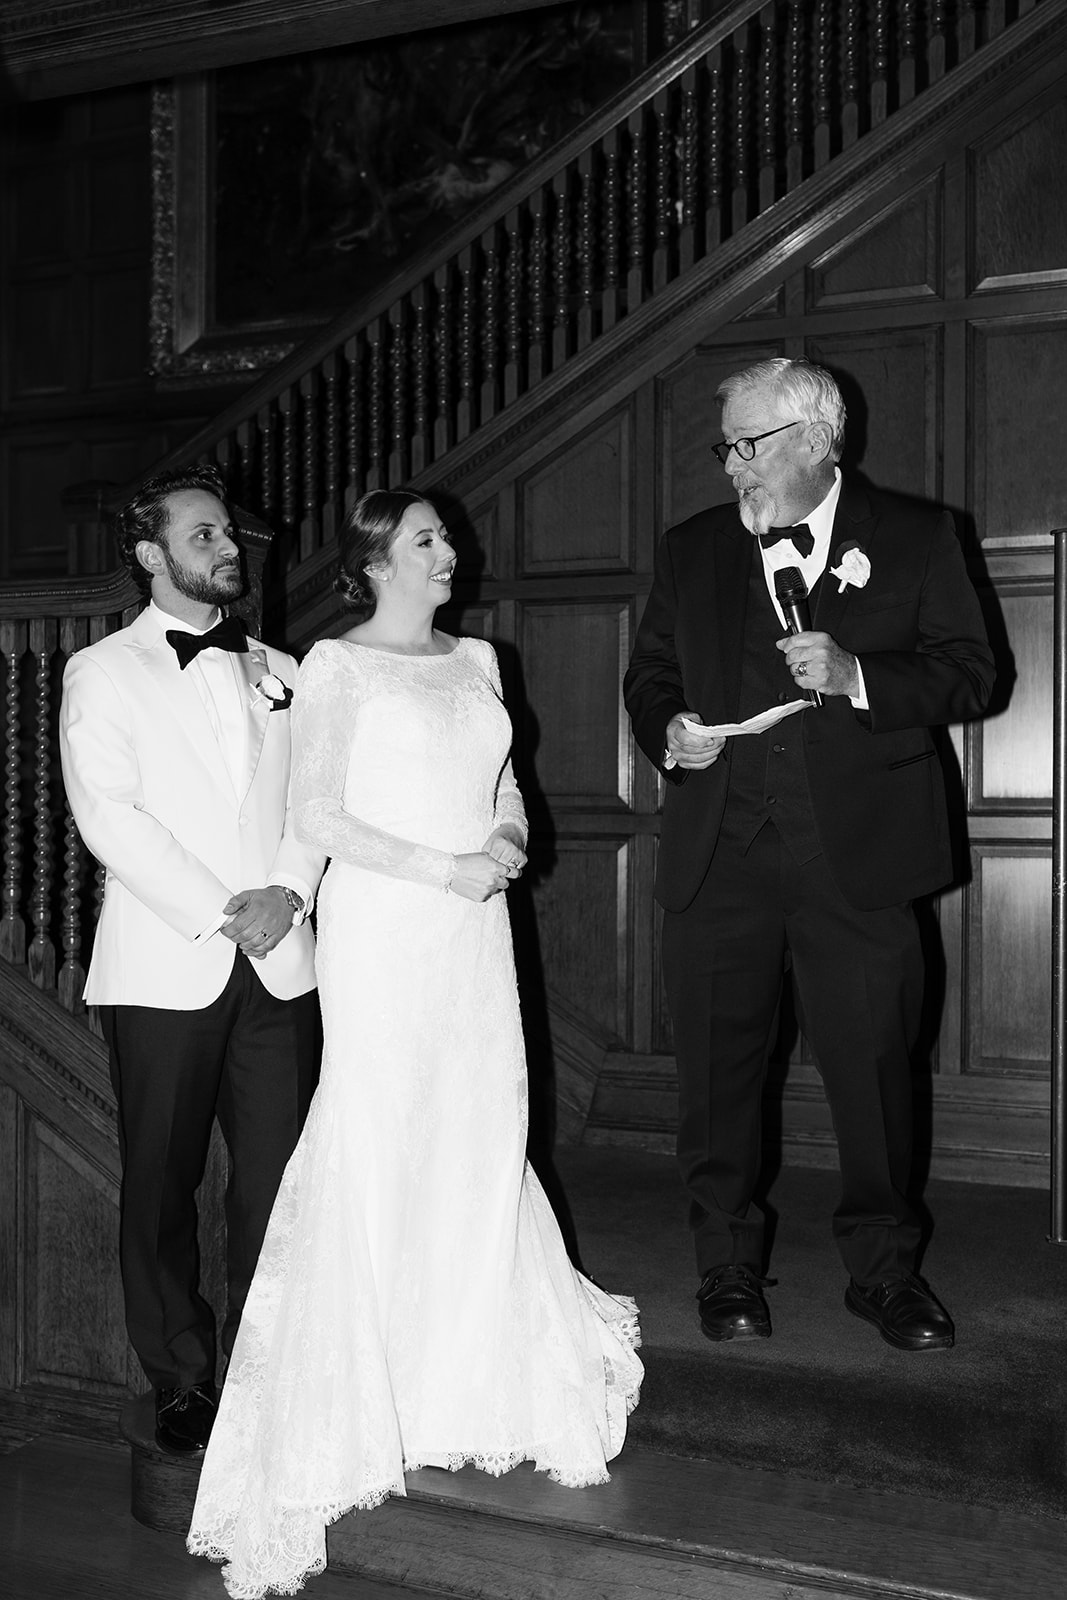 Bride and groom pose together with their father in law